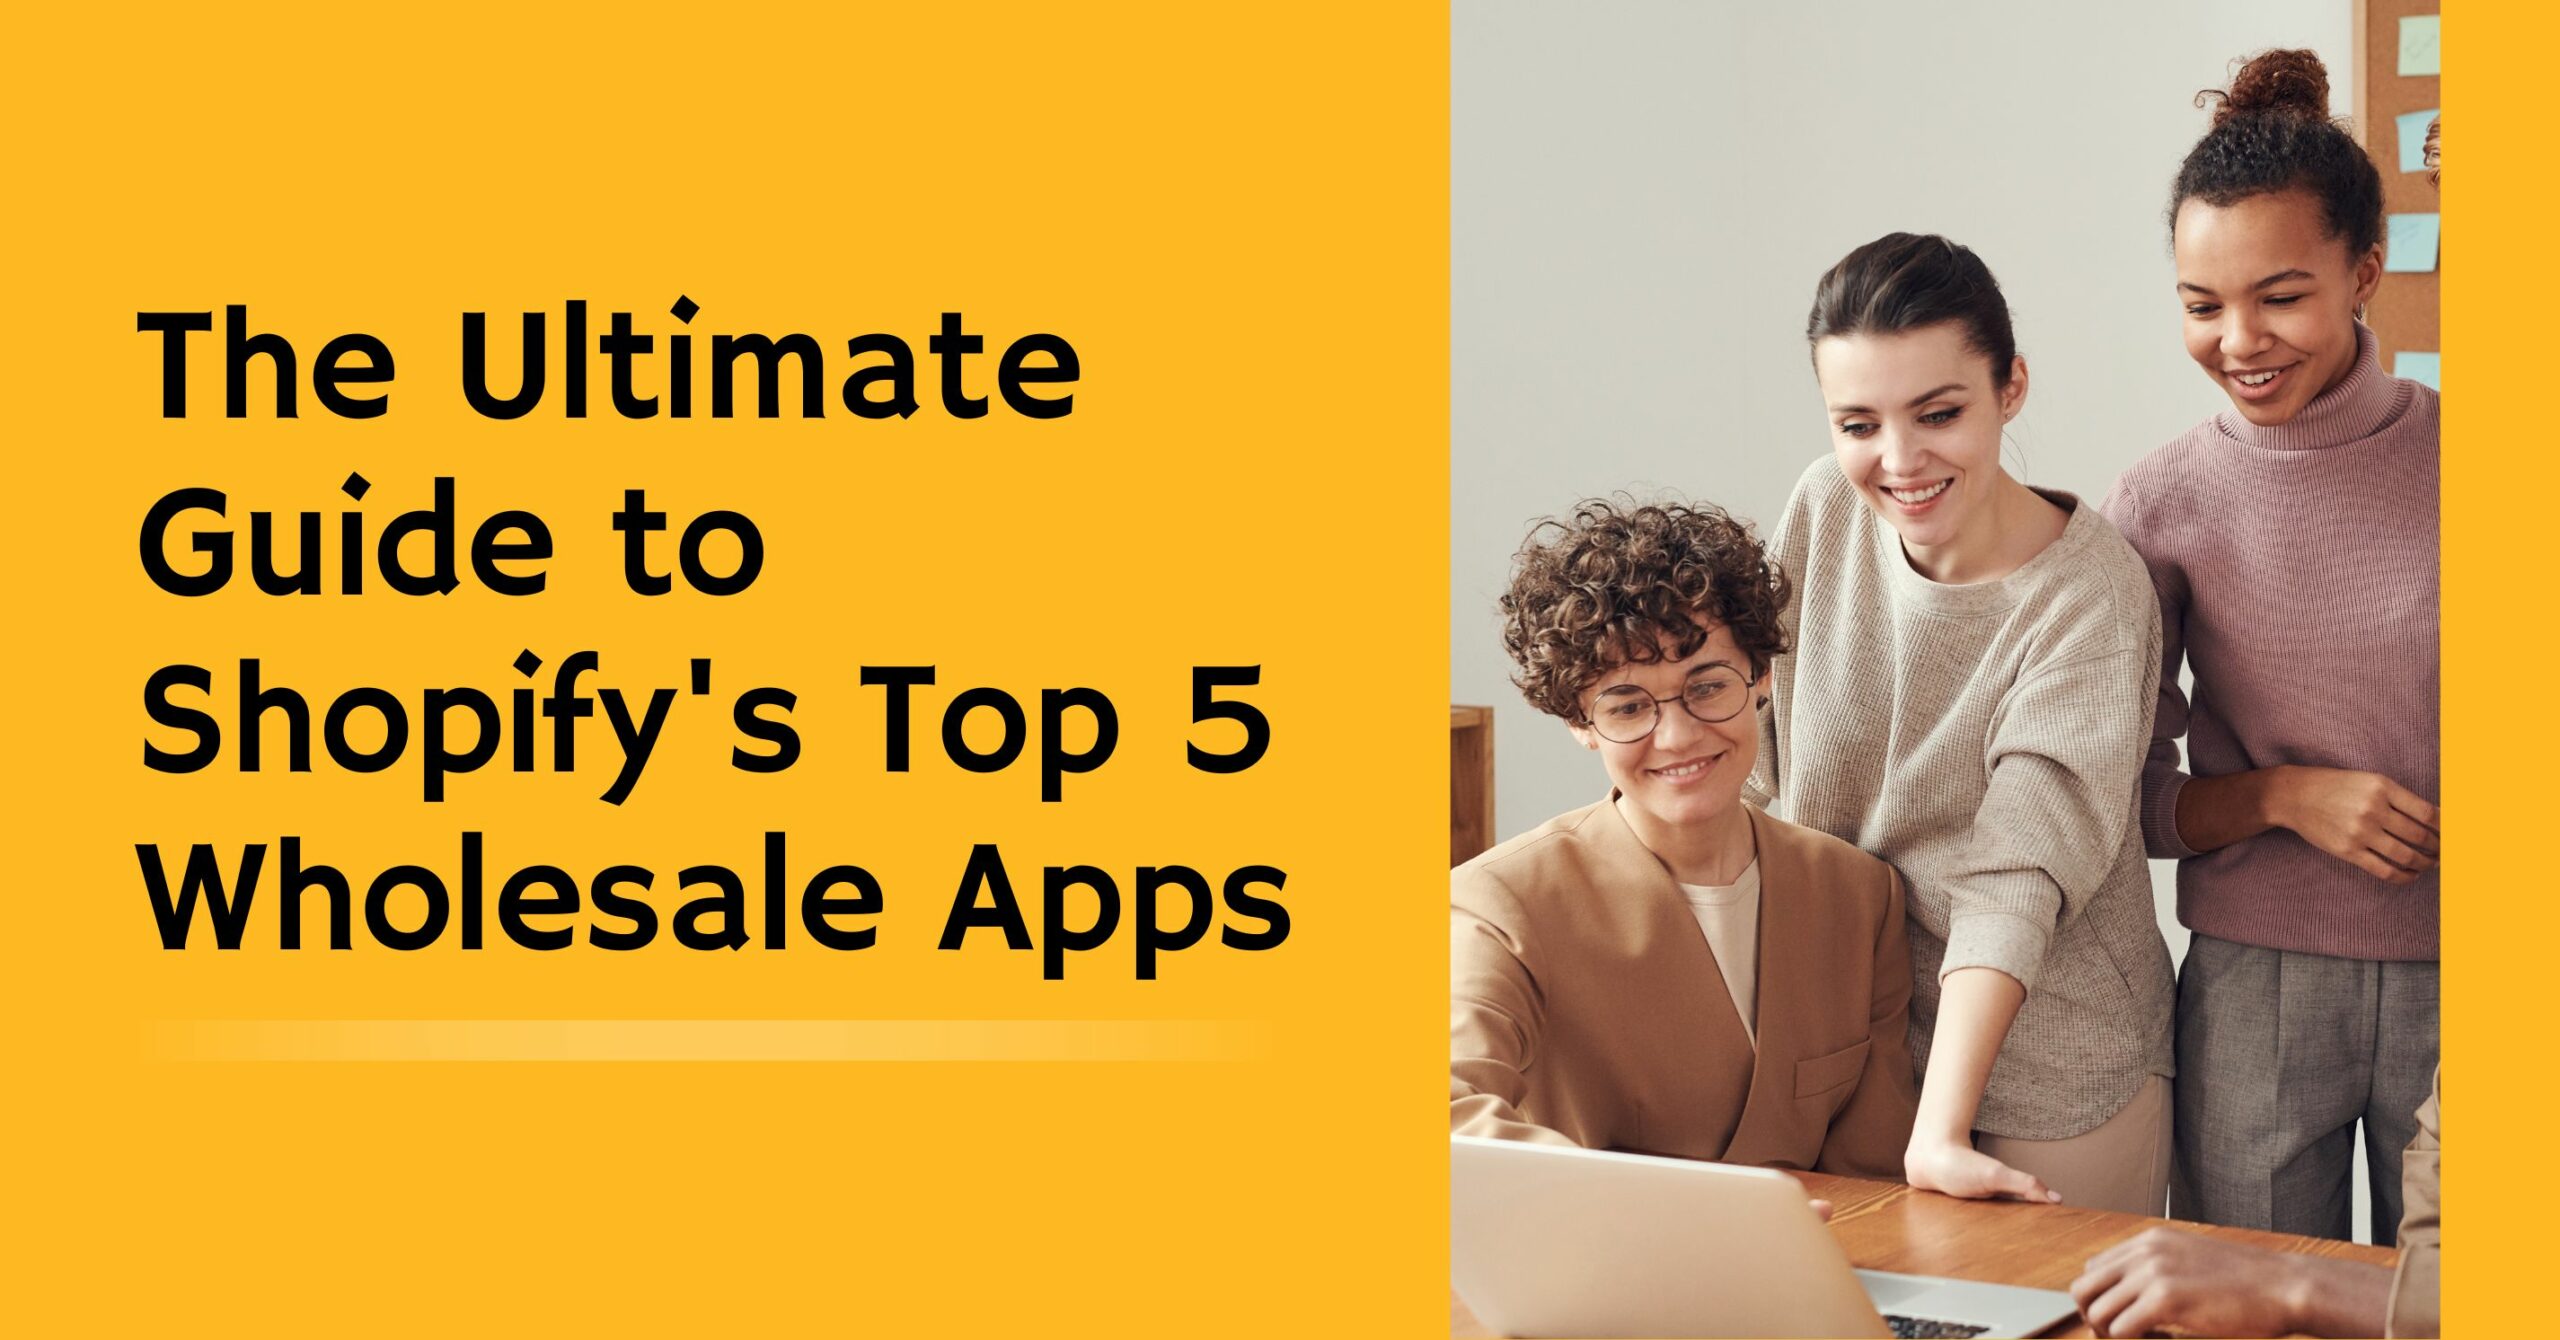 The Ultimate Guide to Shopify's Top 5 Wholesale Apps